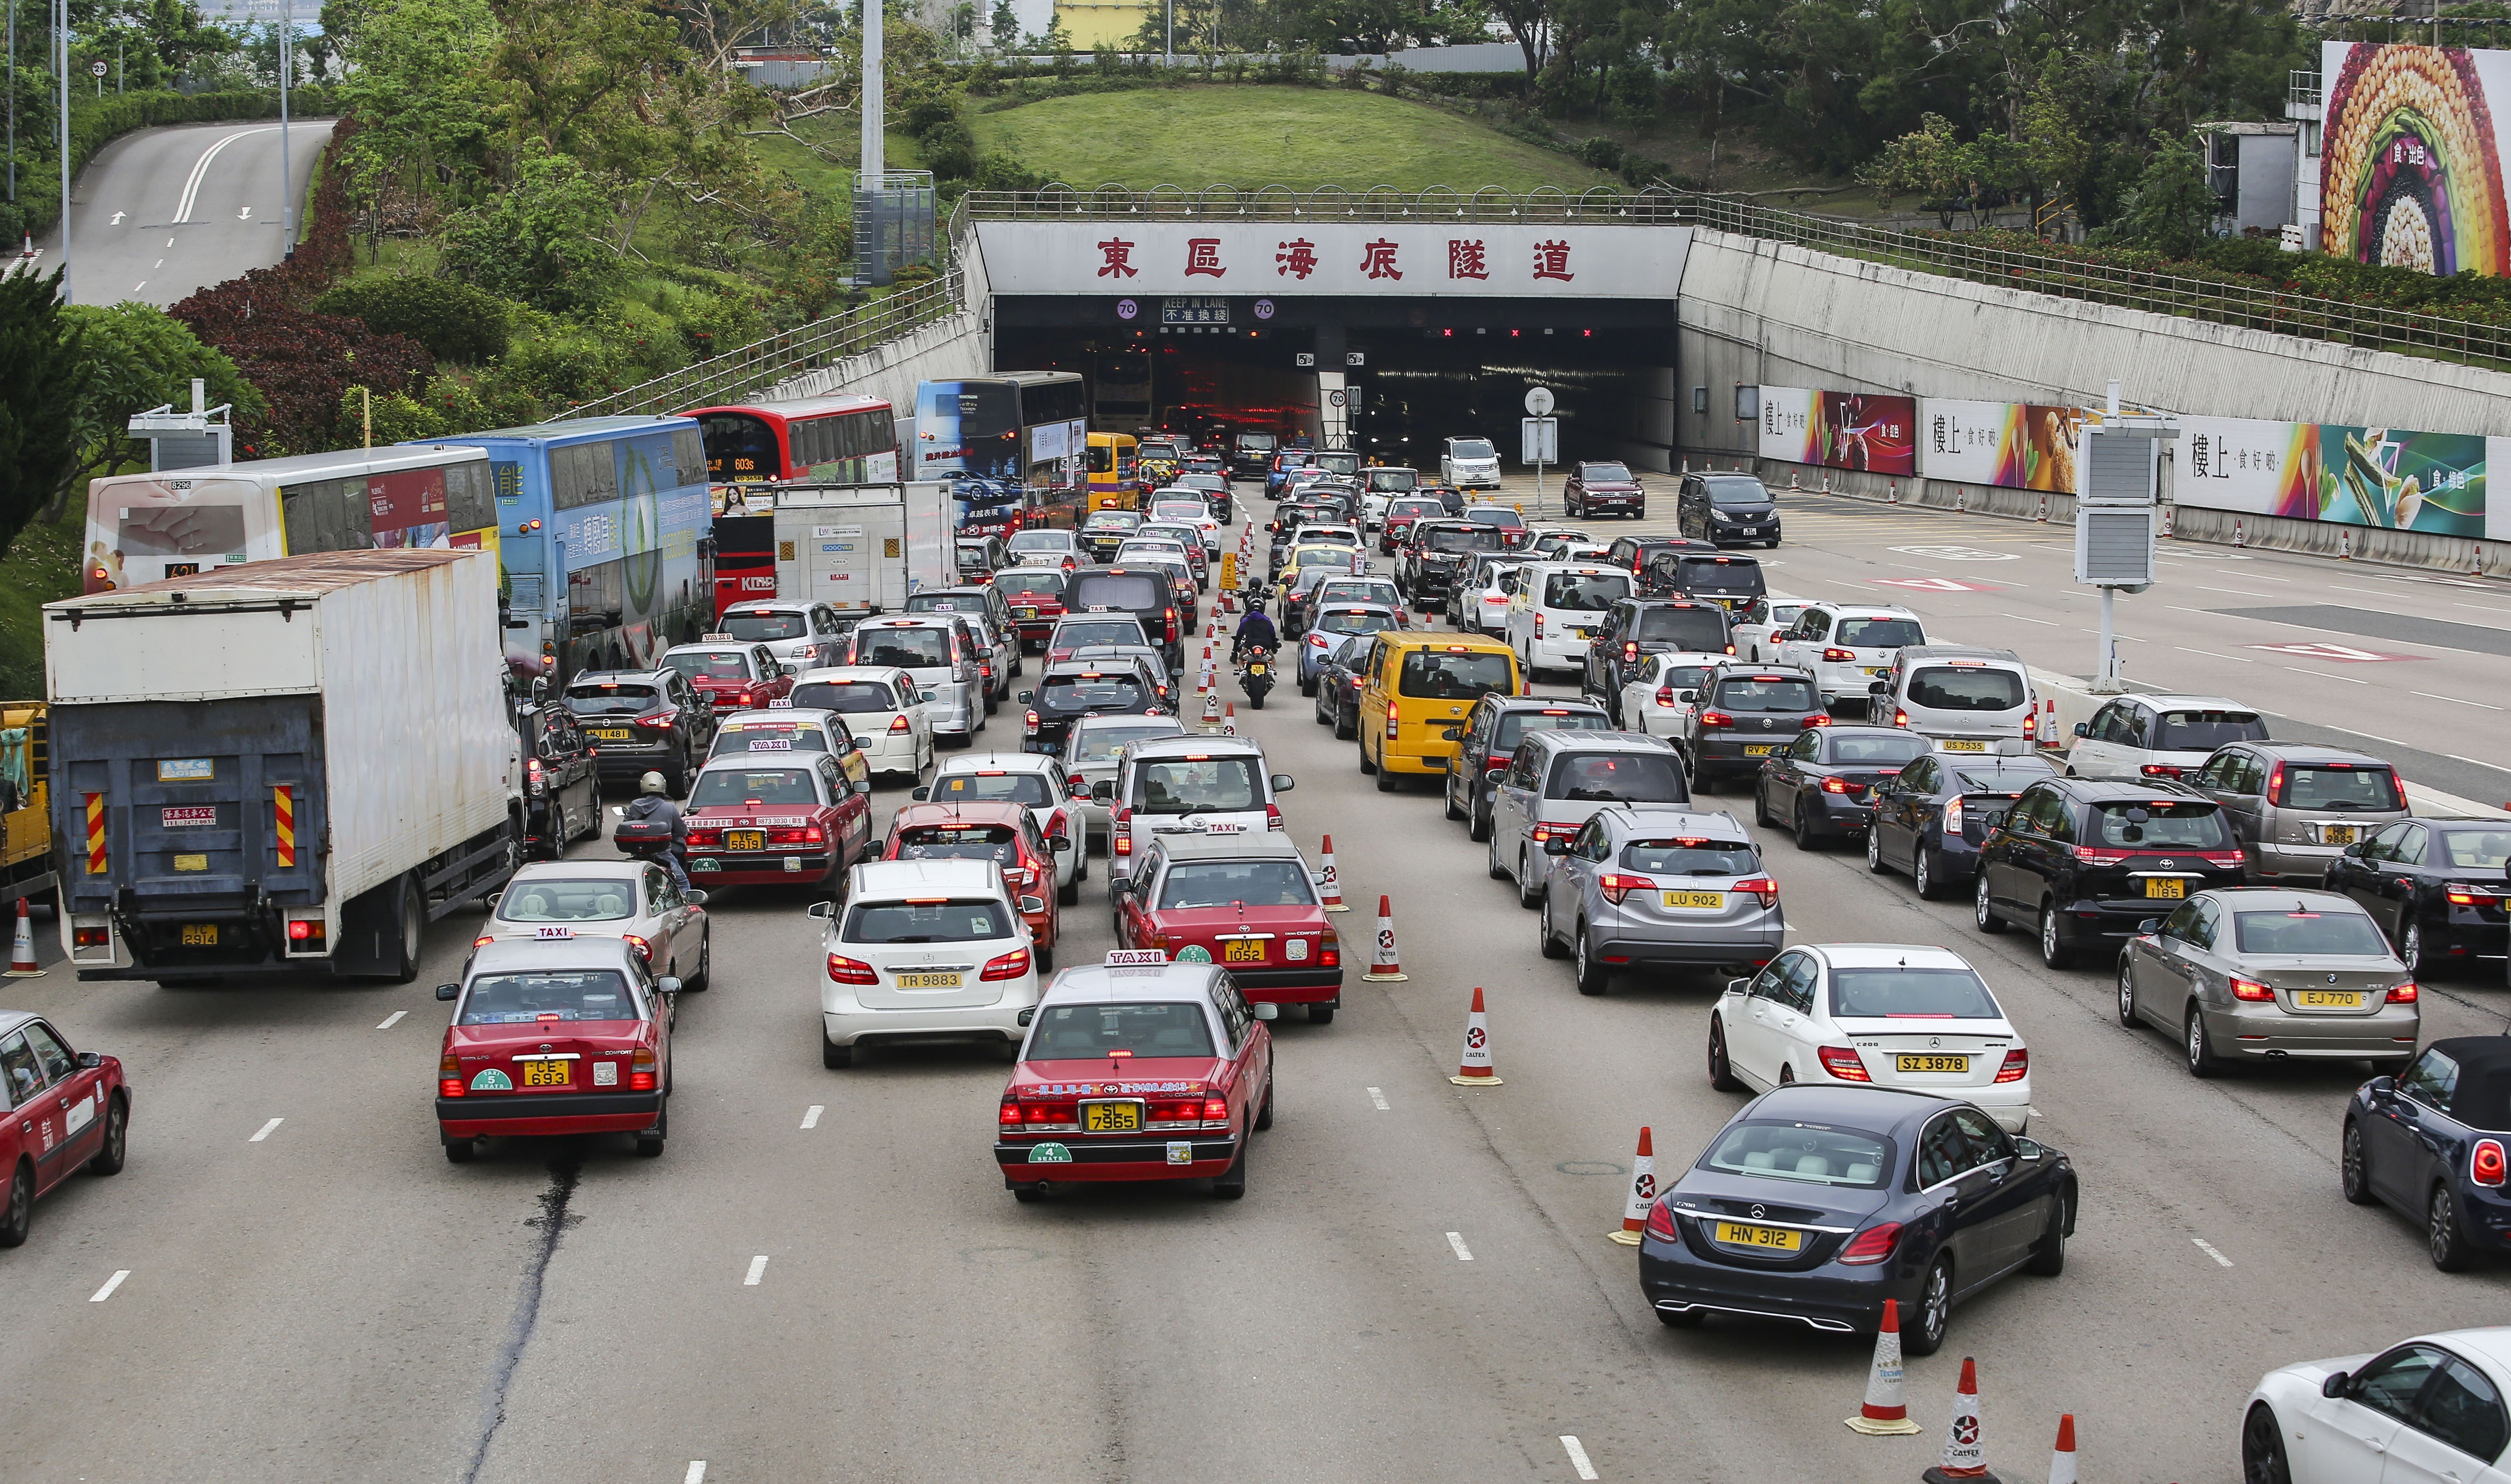 The roads leading to the Eastern Harbour Tunnel are choked with traffic around 8am. Congestion pricing has operated effectively in cities like Singapore and London but Hong Kong has failed to move forward. Photo: Edmond So